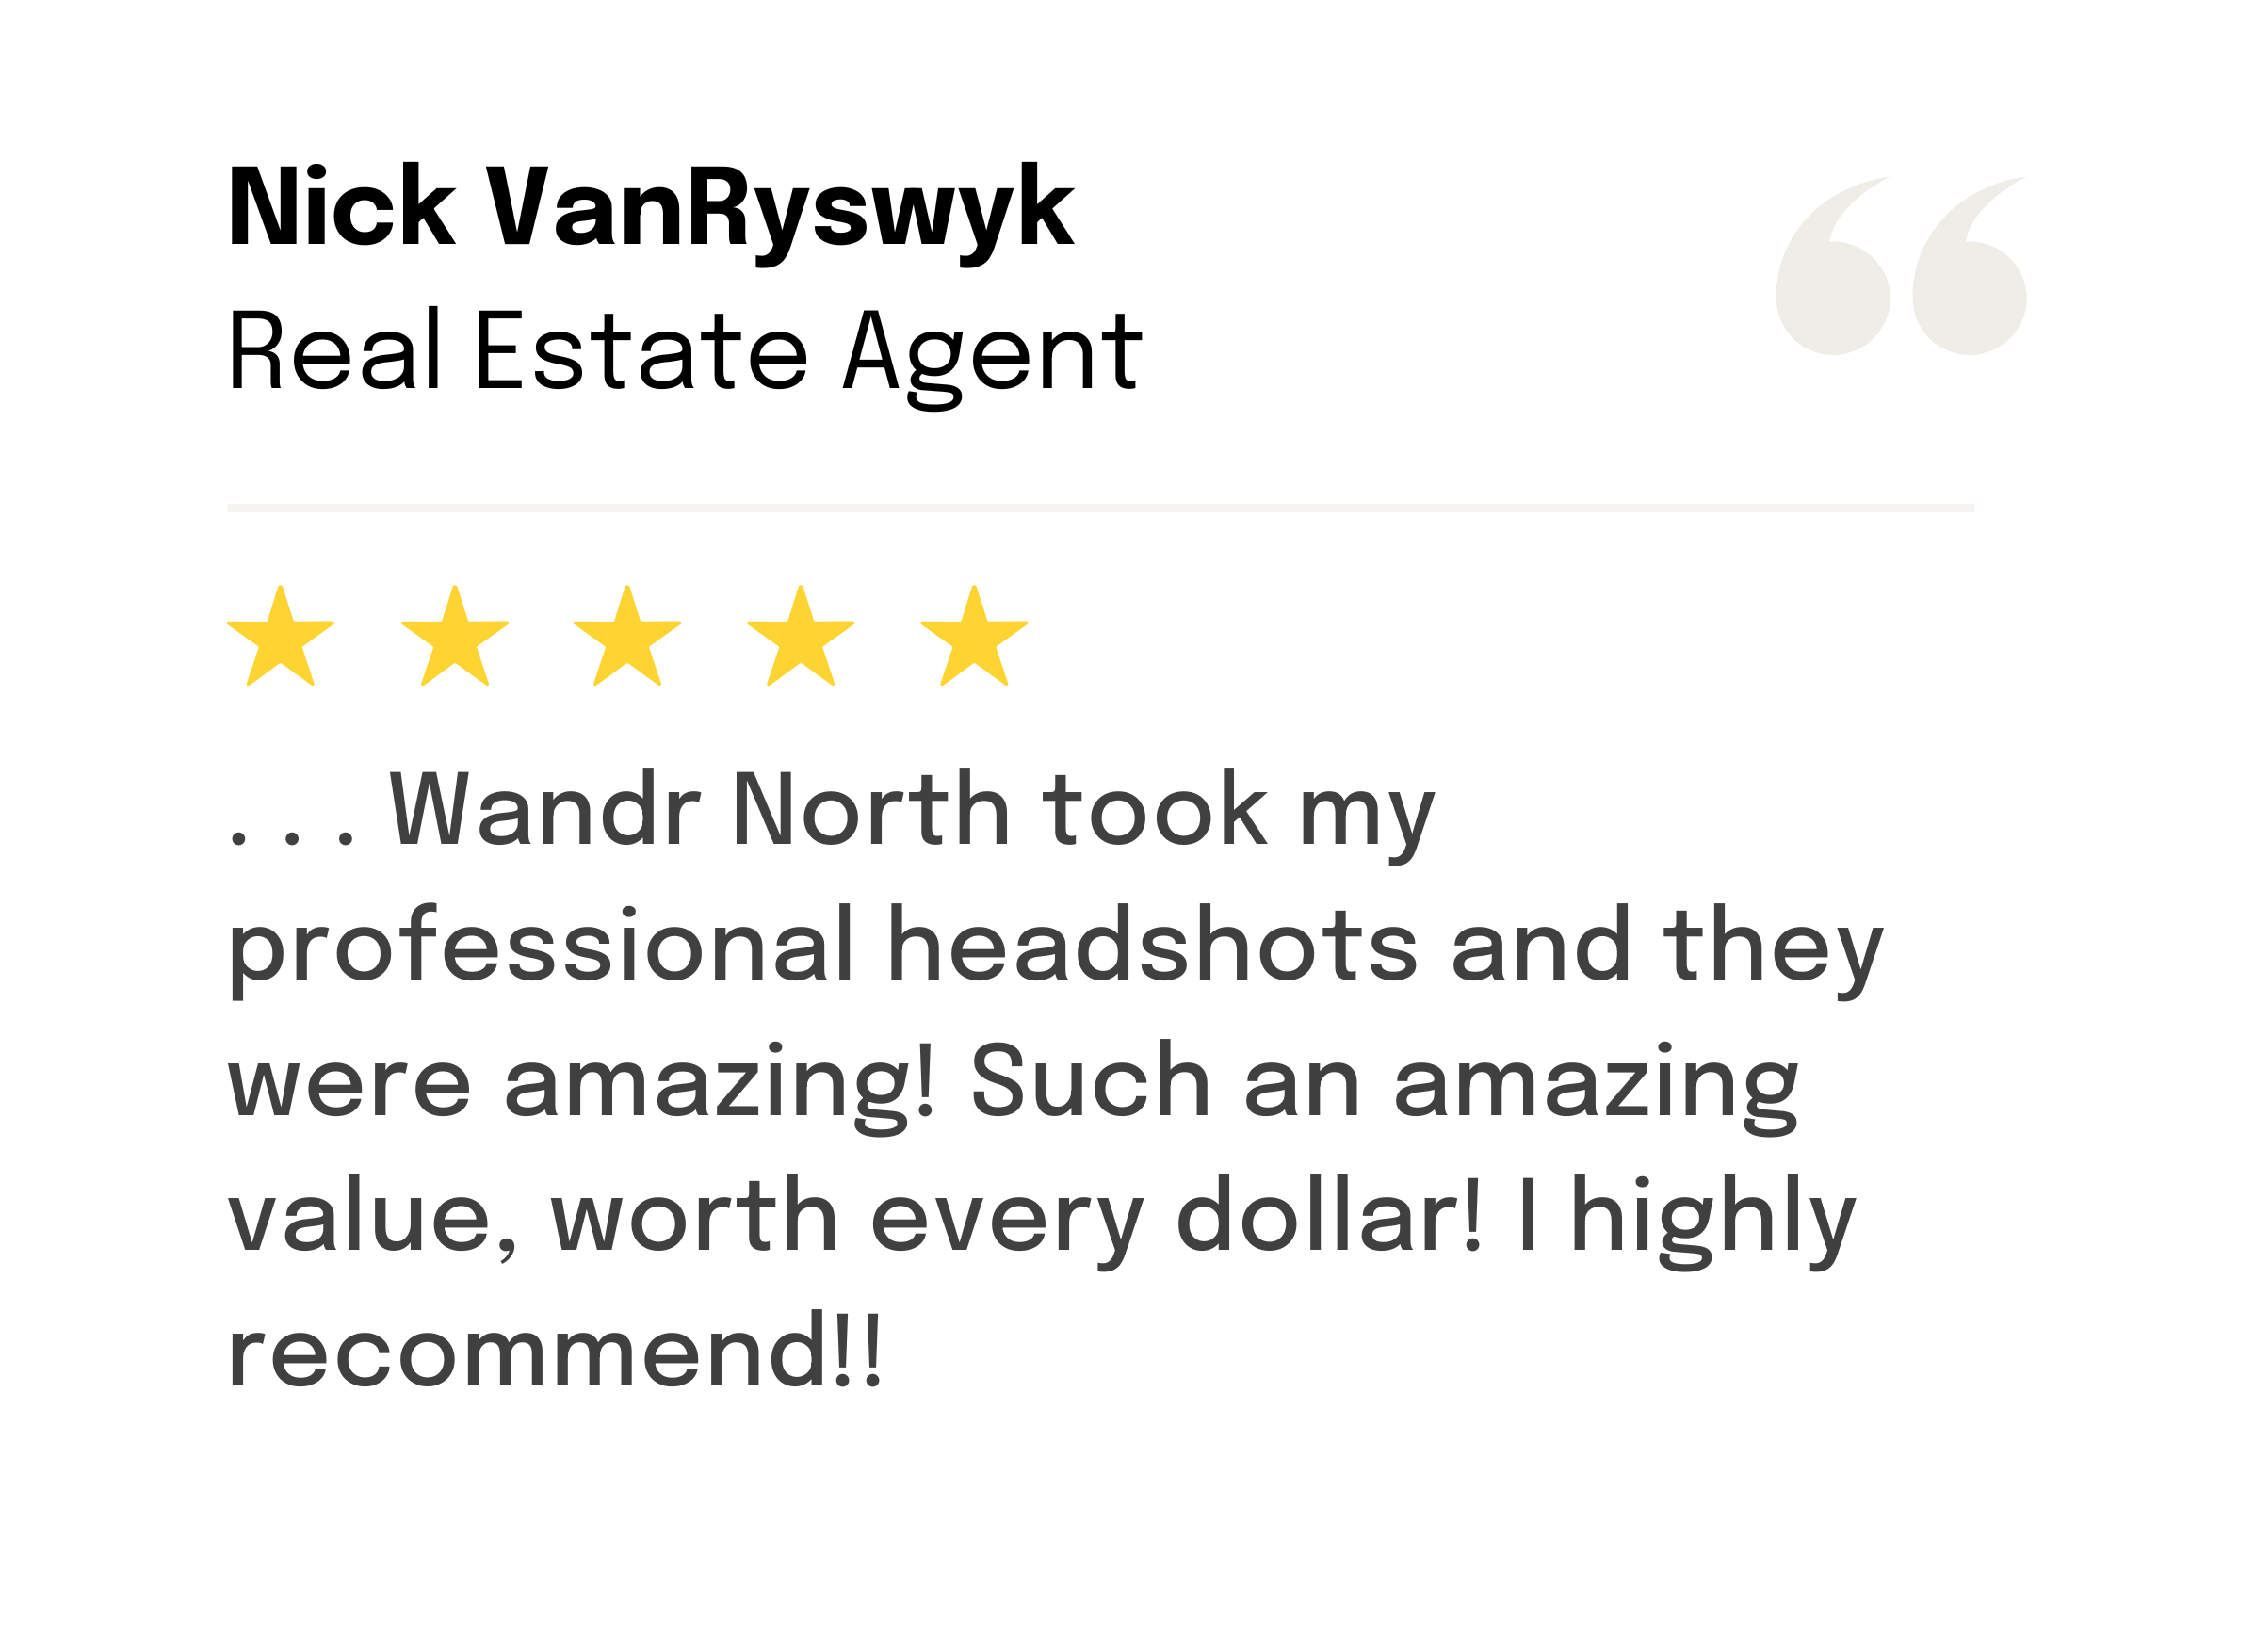 Nick VanRyswyk writes a 5-star review to Wandr North for their headshot photography services.